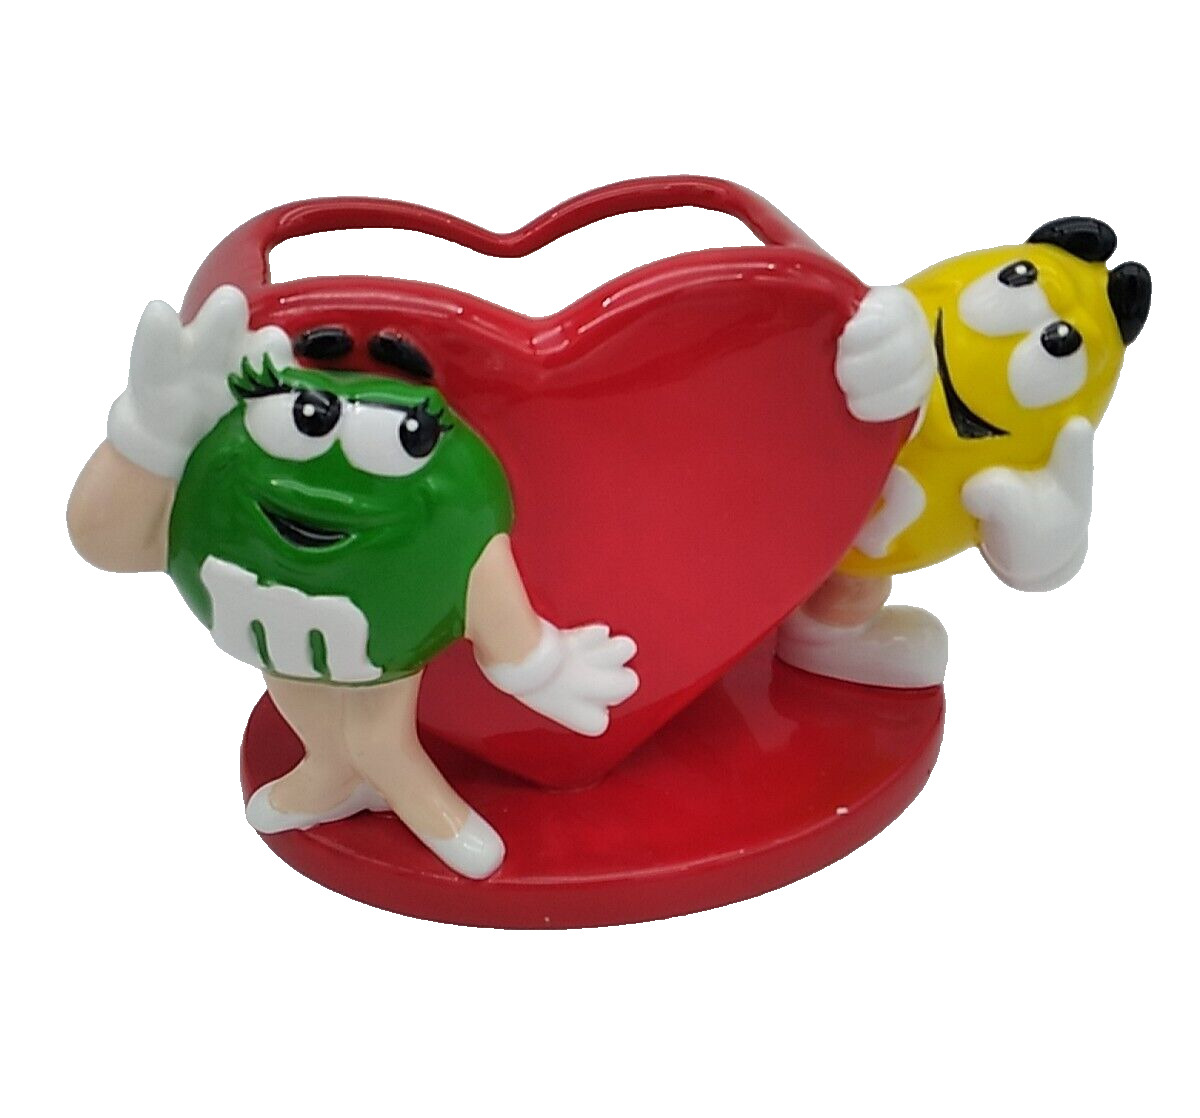 Retro M&Ms Red Ceramic Heart, Green & Yellow M&M\'s Candy Dish / Small Vase